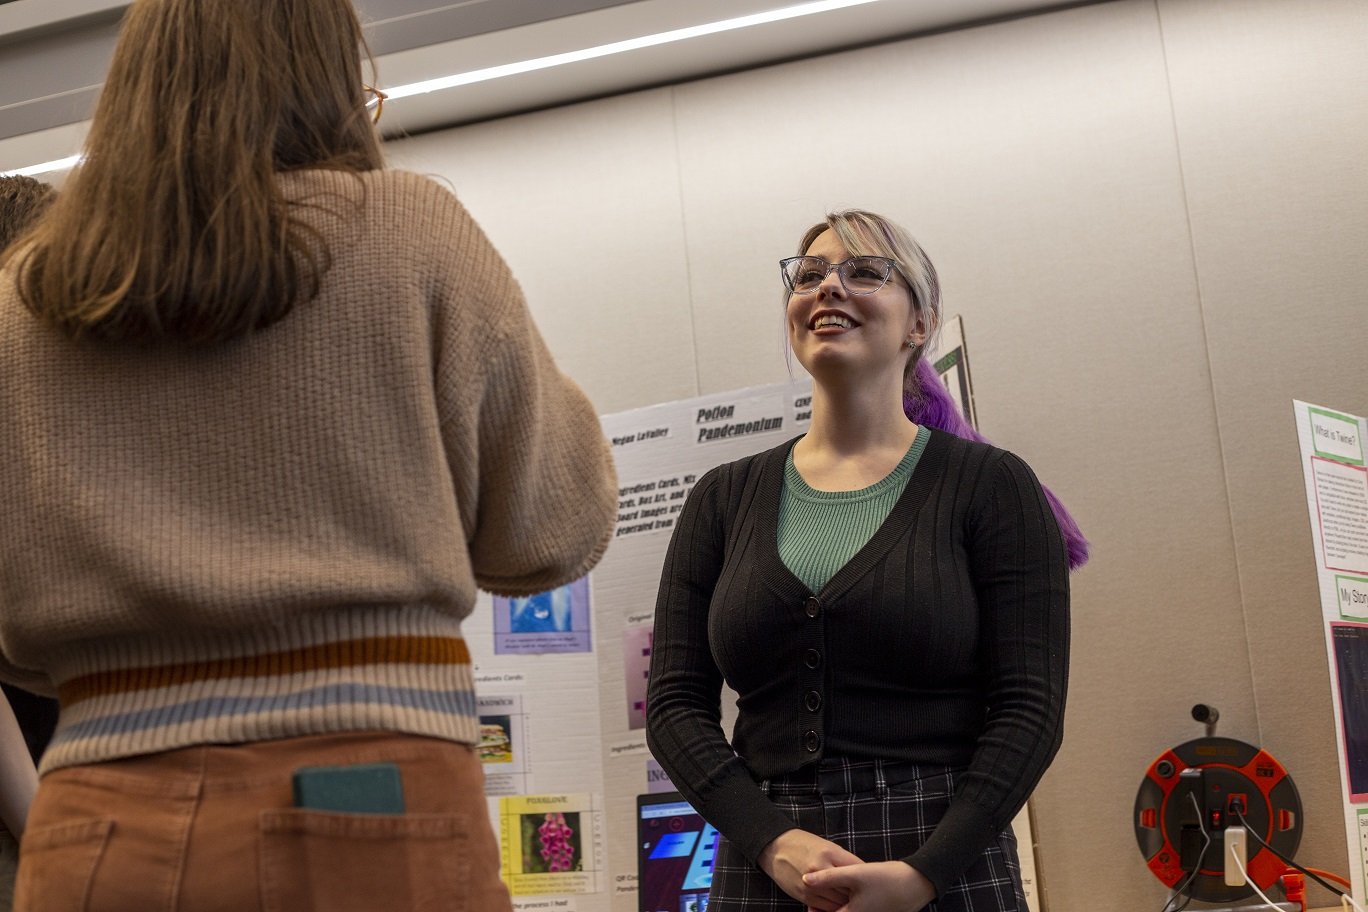 Students share research at CEHC's Fall 2022 Showcase.